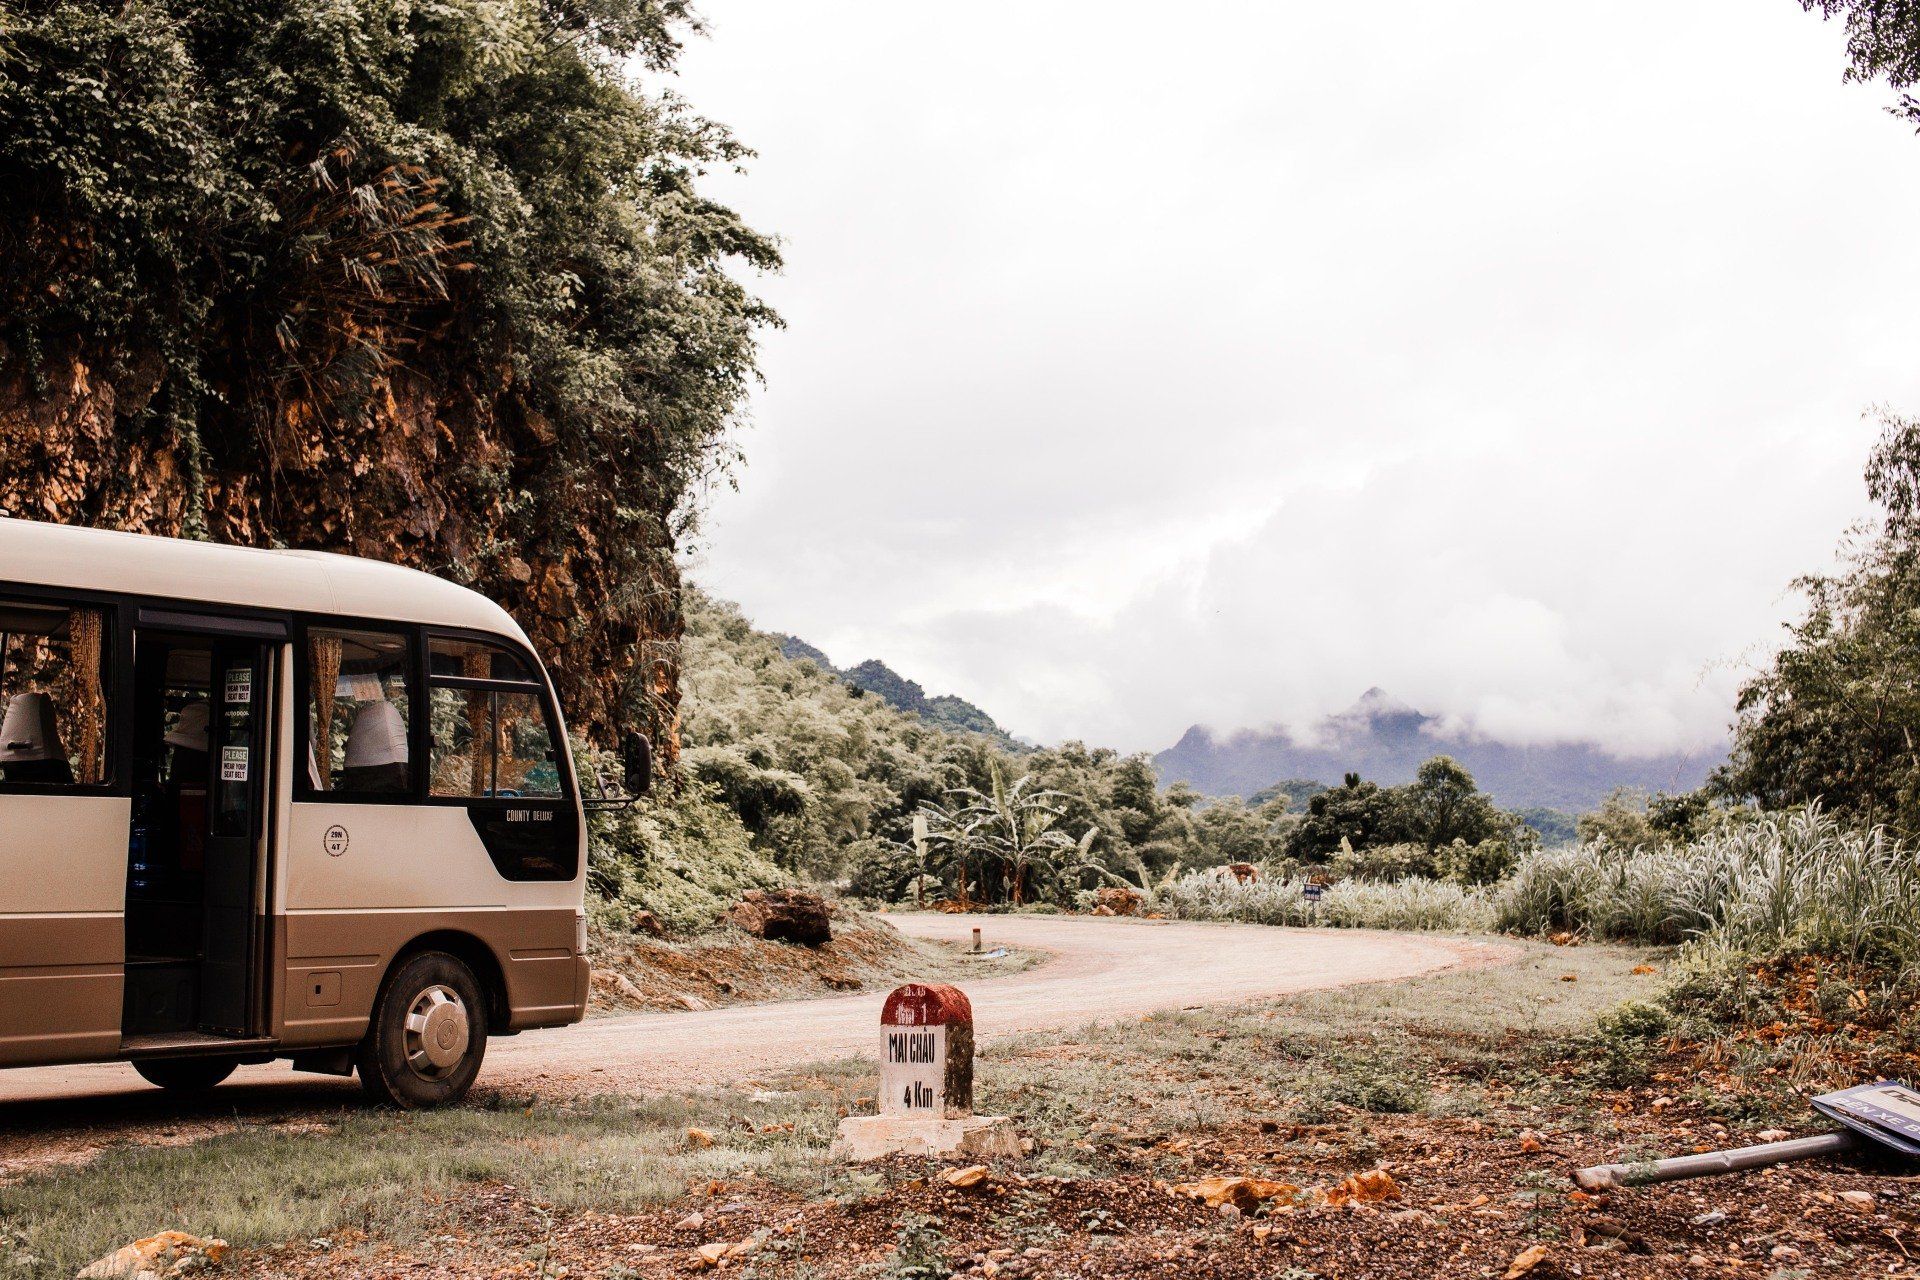 An RV bus stationed on the side of the road, in the mountains.